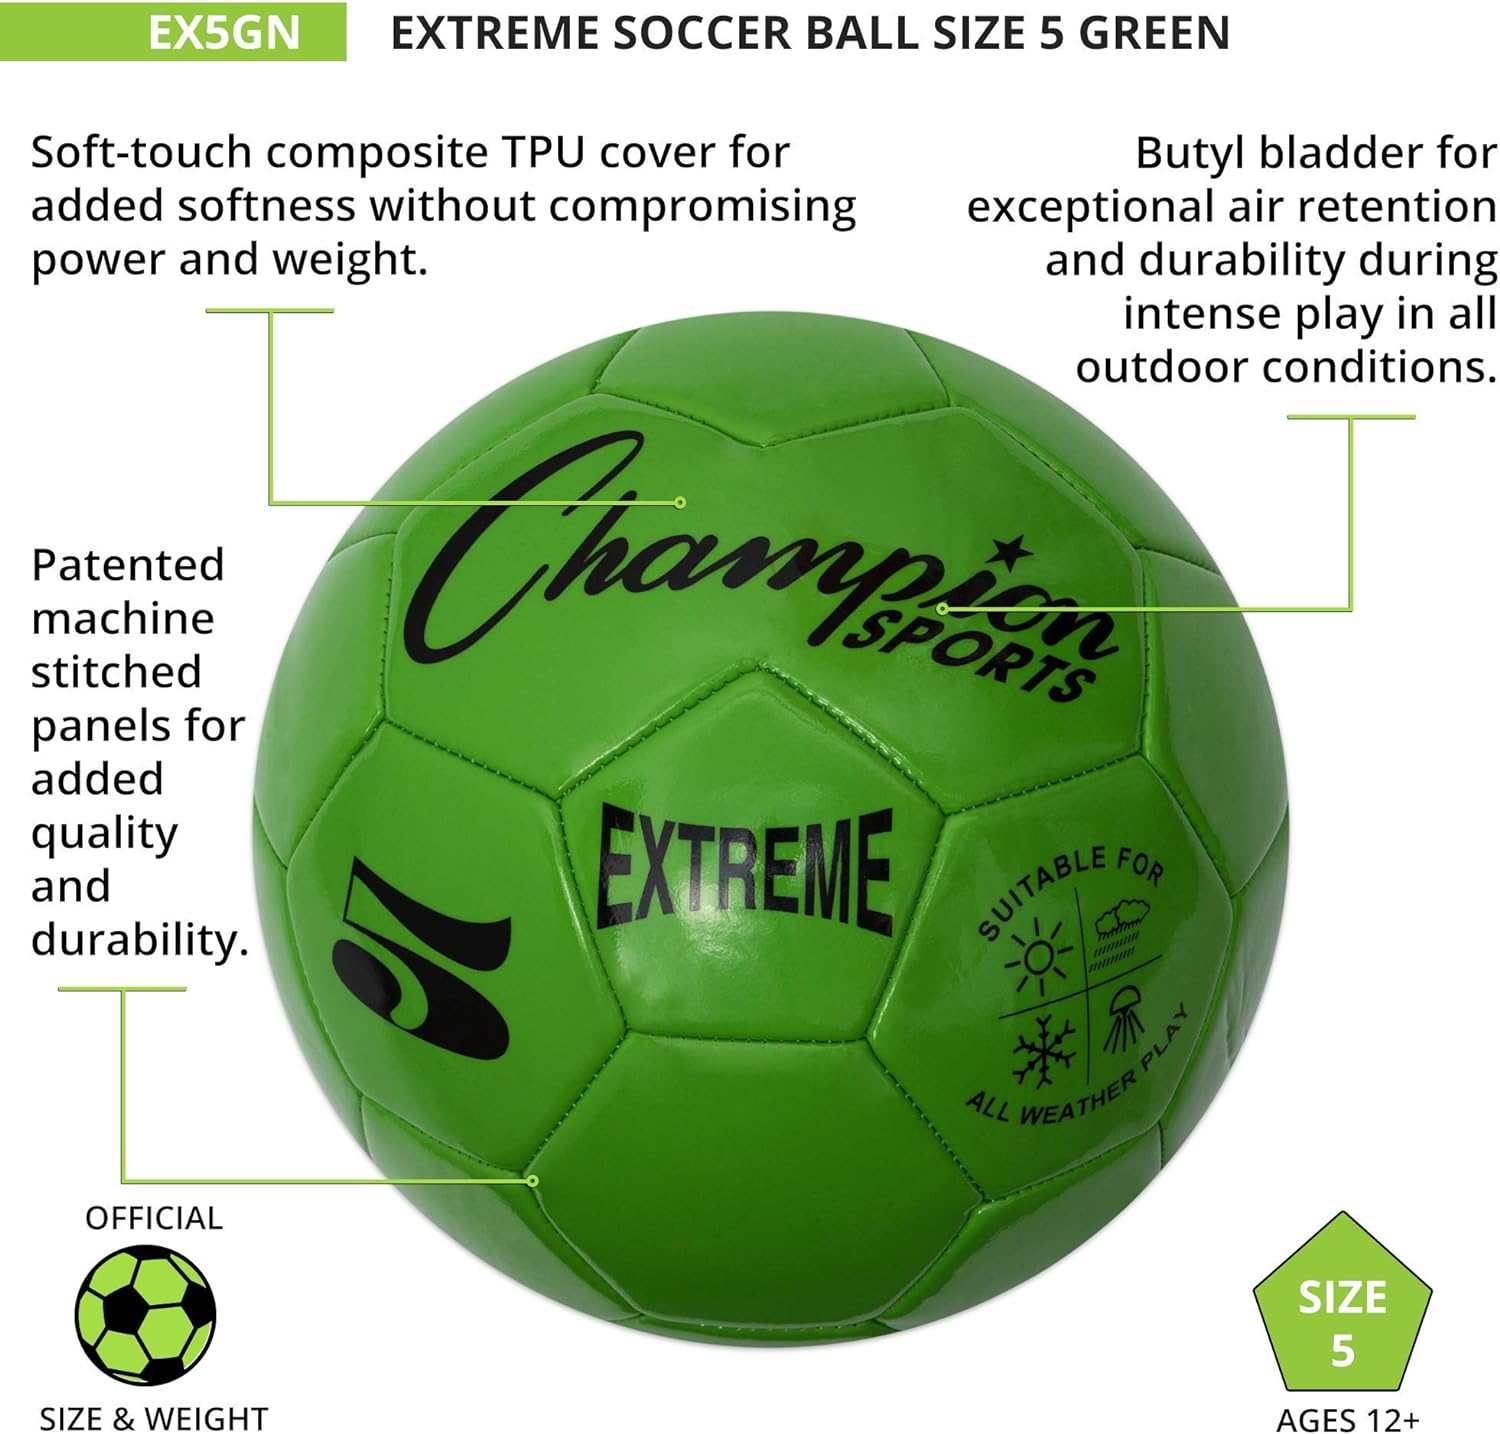 Champion Sports Extreme Series Composite Soccer Ball: Sizes 3, 4, 5 in Multiple Colors